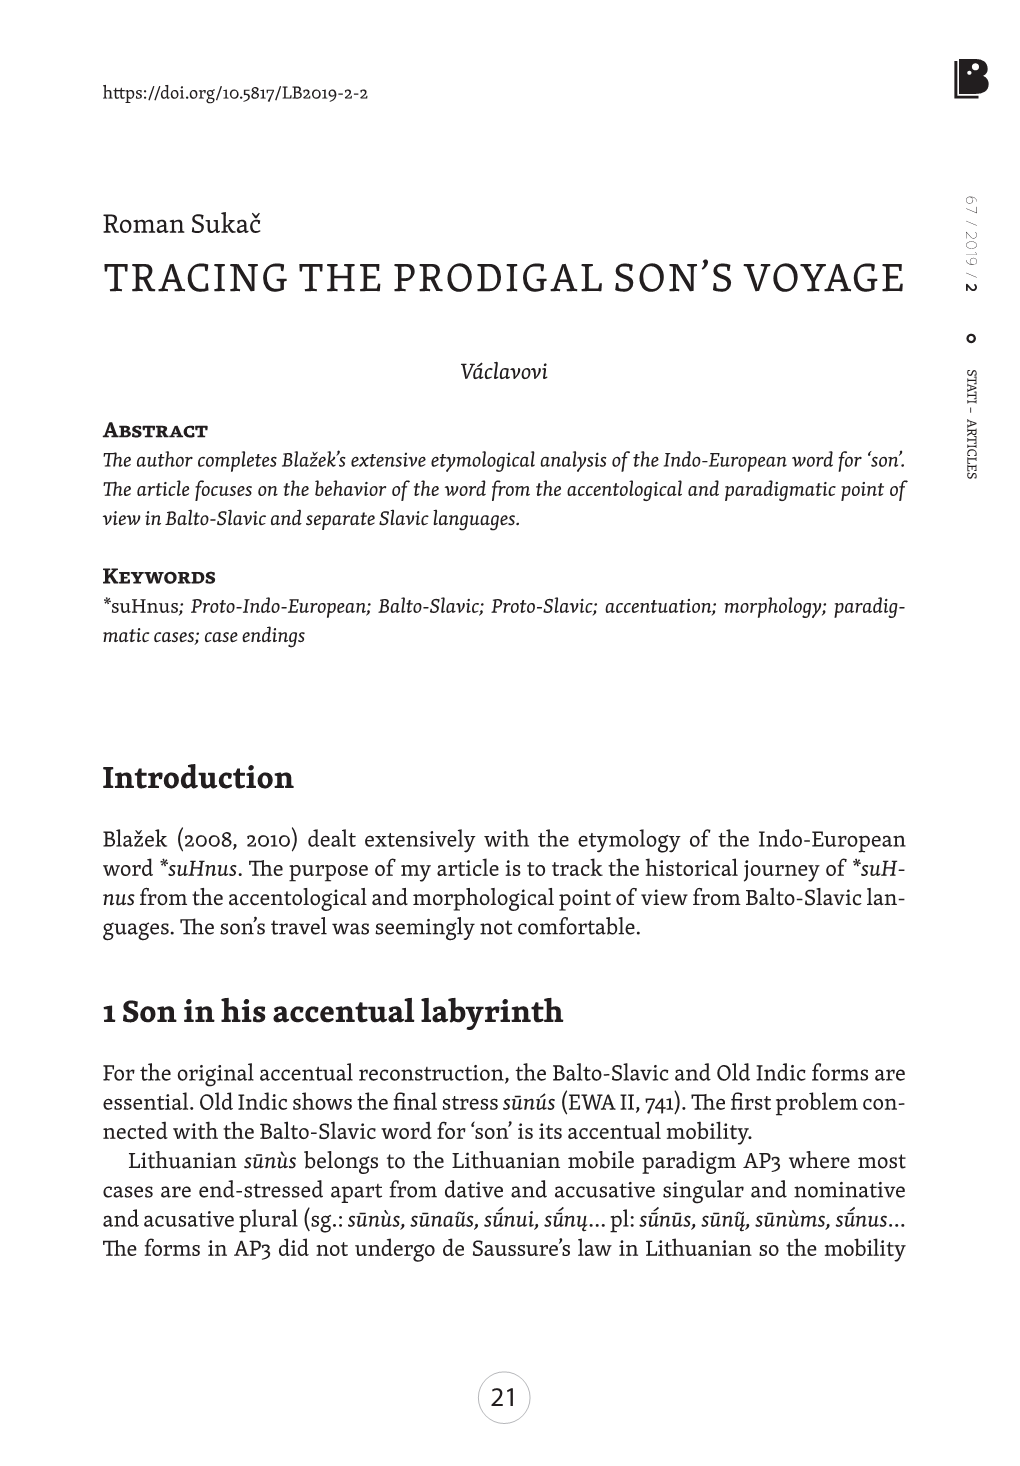 Tracing the Prodigal Son's Voyage